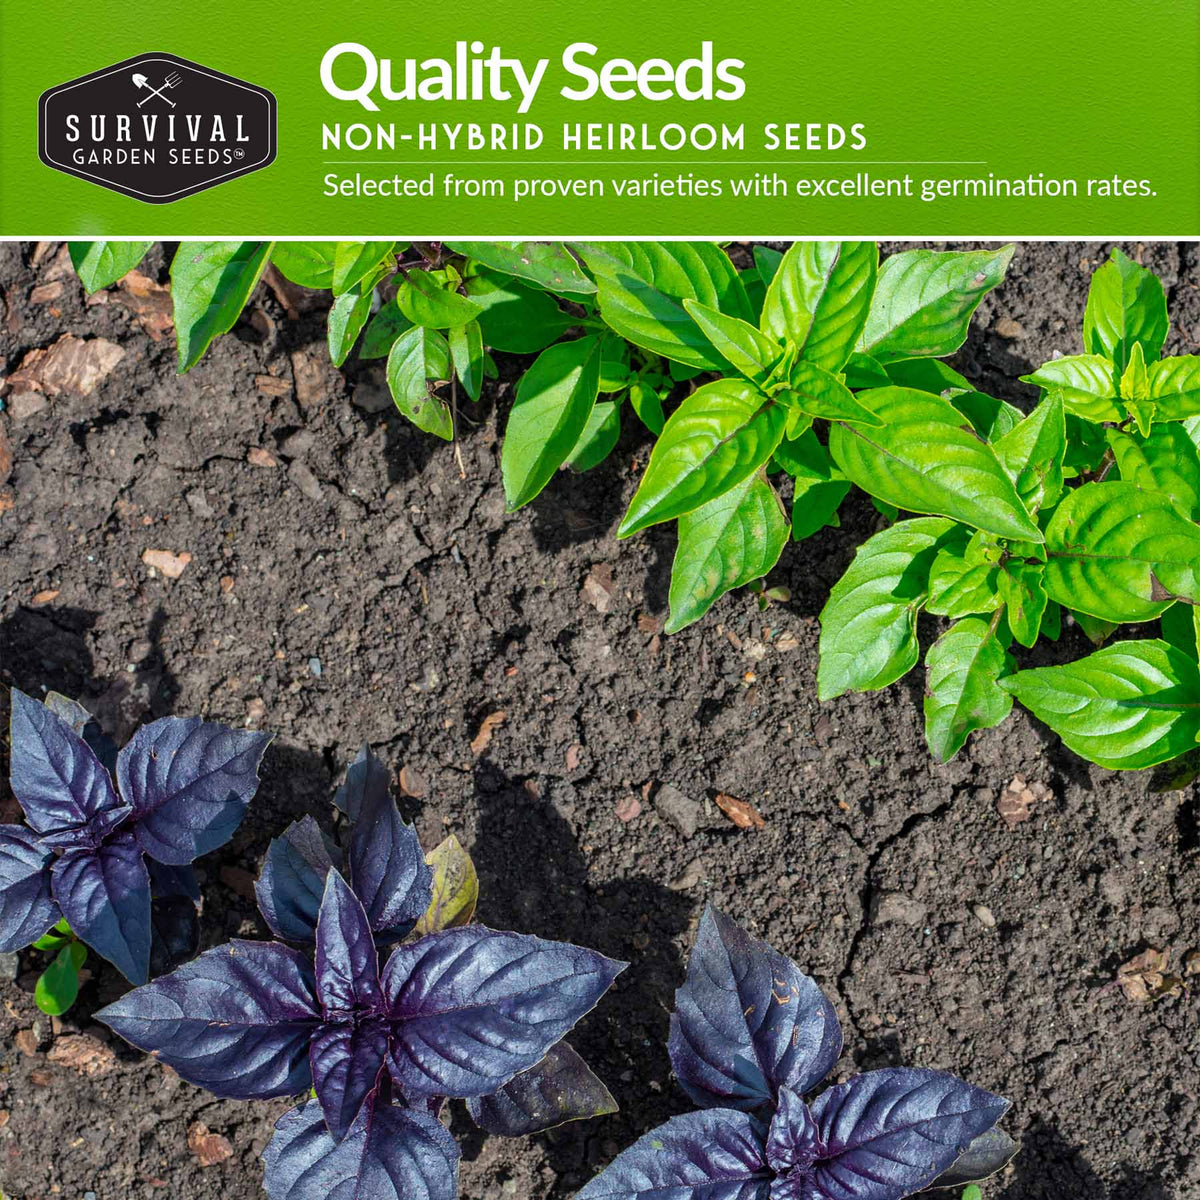 Quality non-hybrid heirloom seeds with proven germination